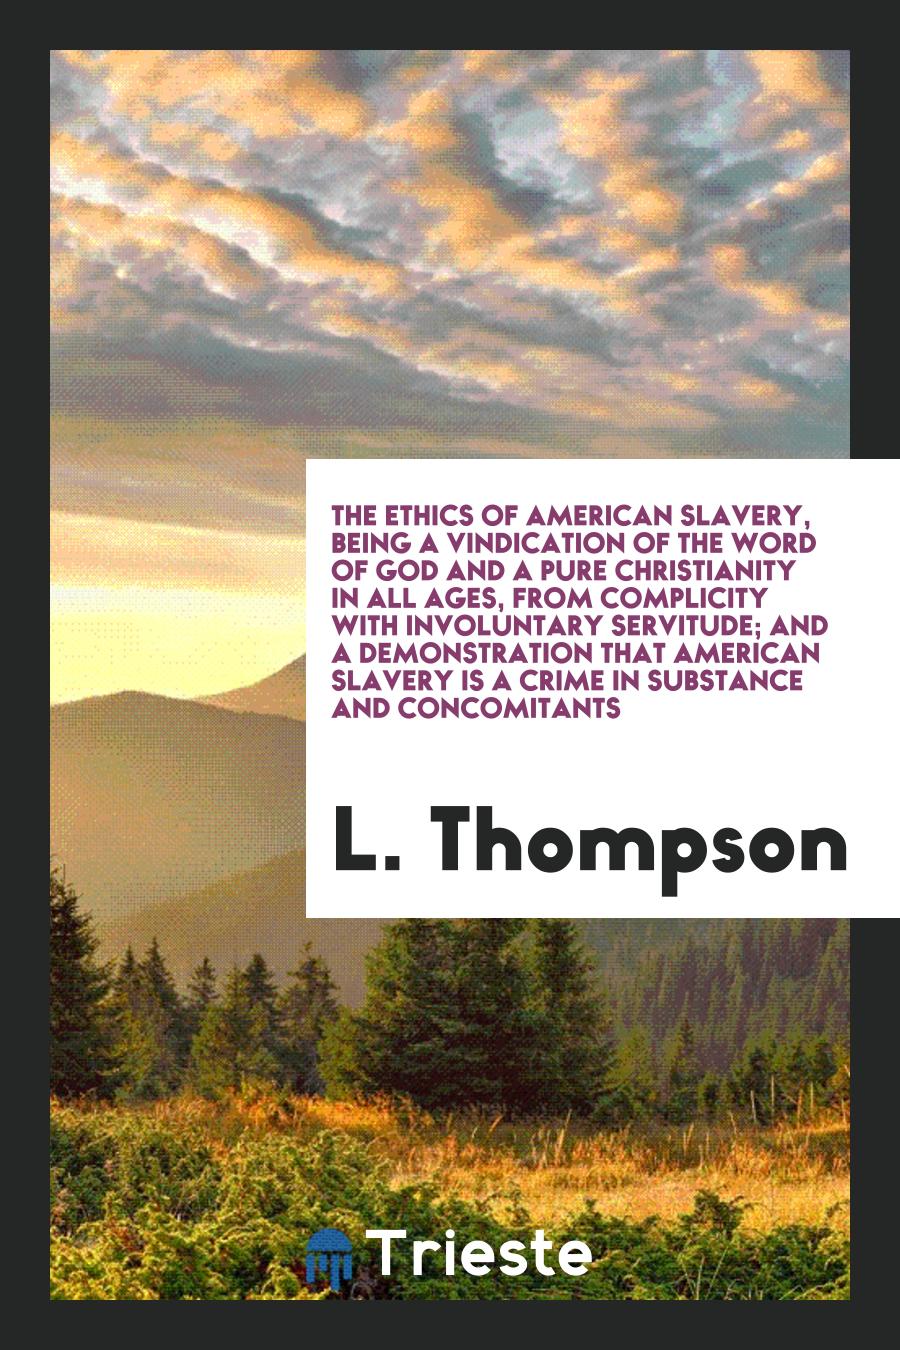 The Ethics of American Slavery, Being a Vindication of the Word of God and a Pure Christianity in All Ages, from Complicity with Involuntary Servitude; And a Demonstration That American Slavery is a Crime in Substance and Concomitants